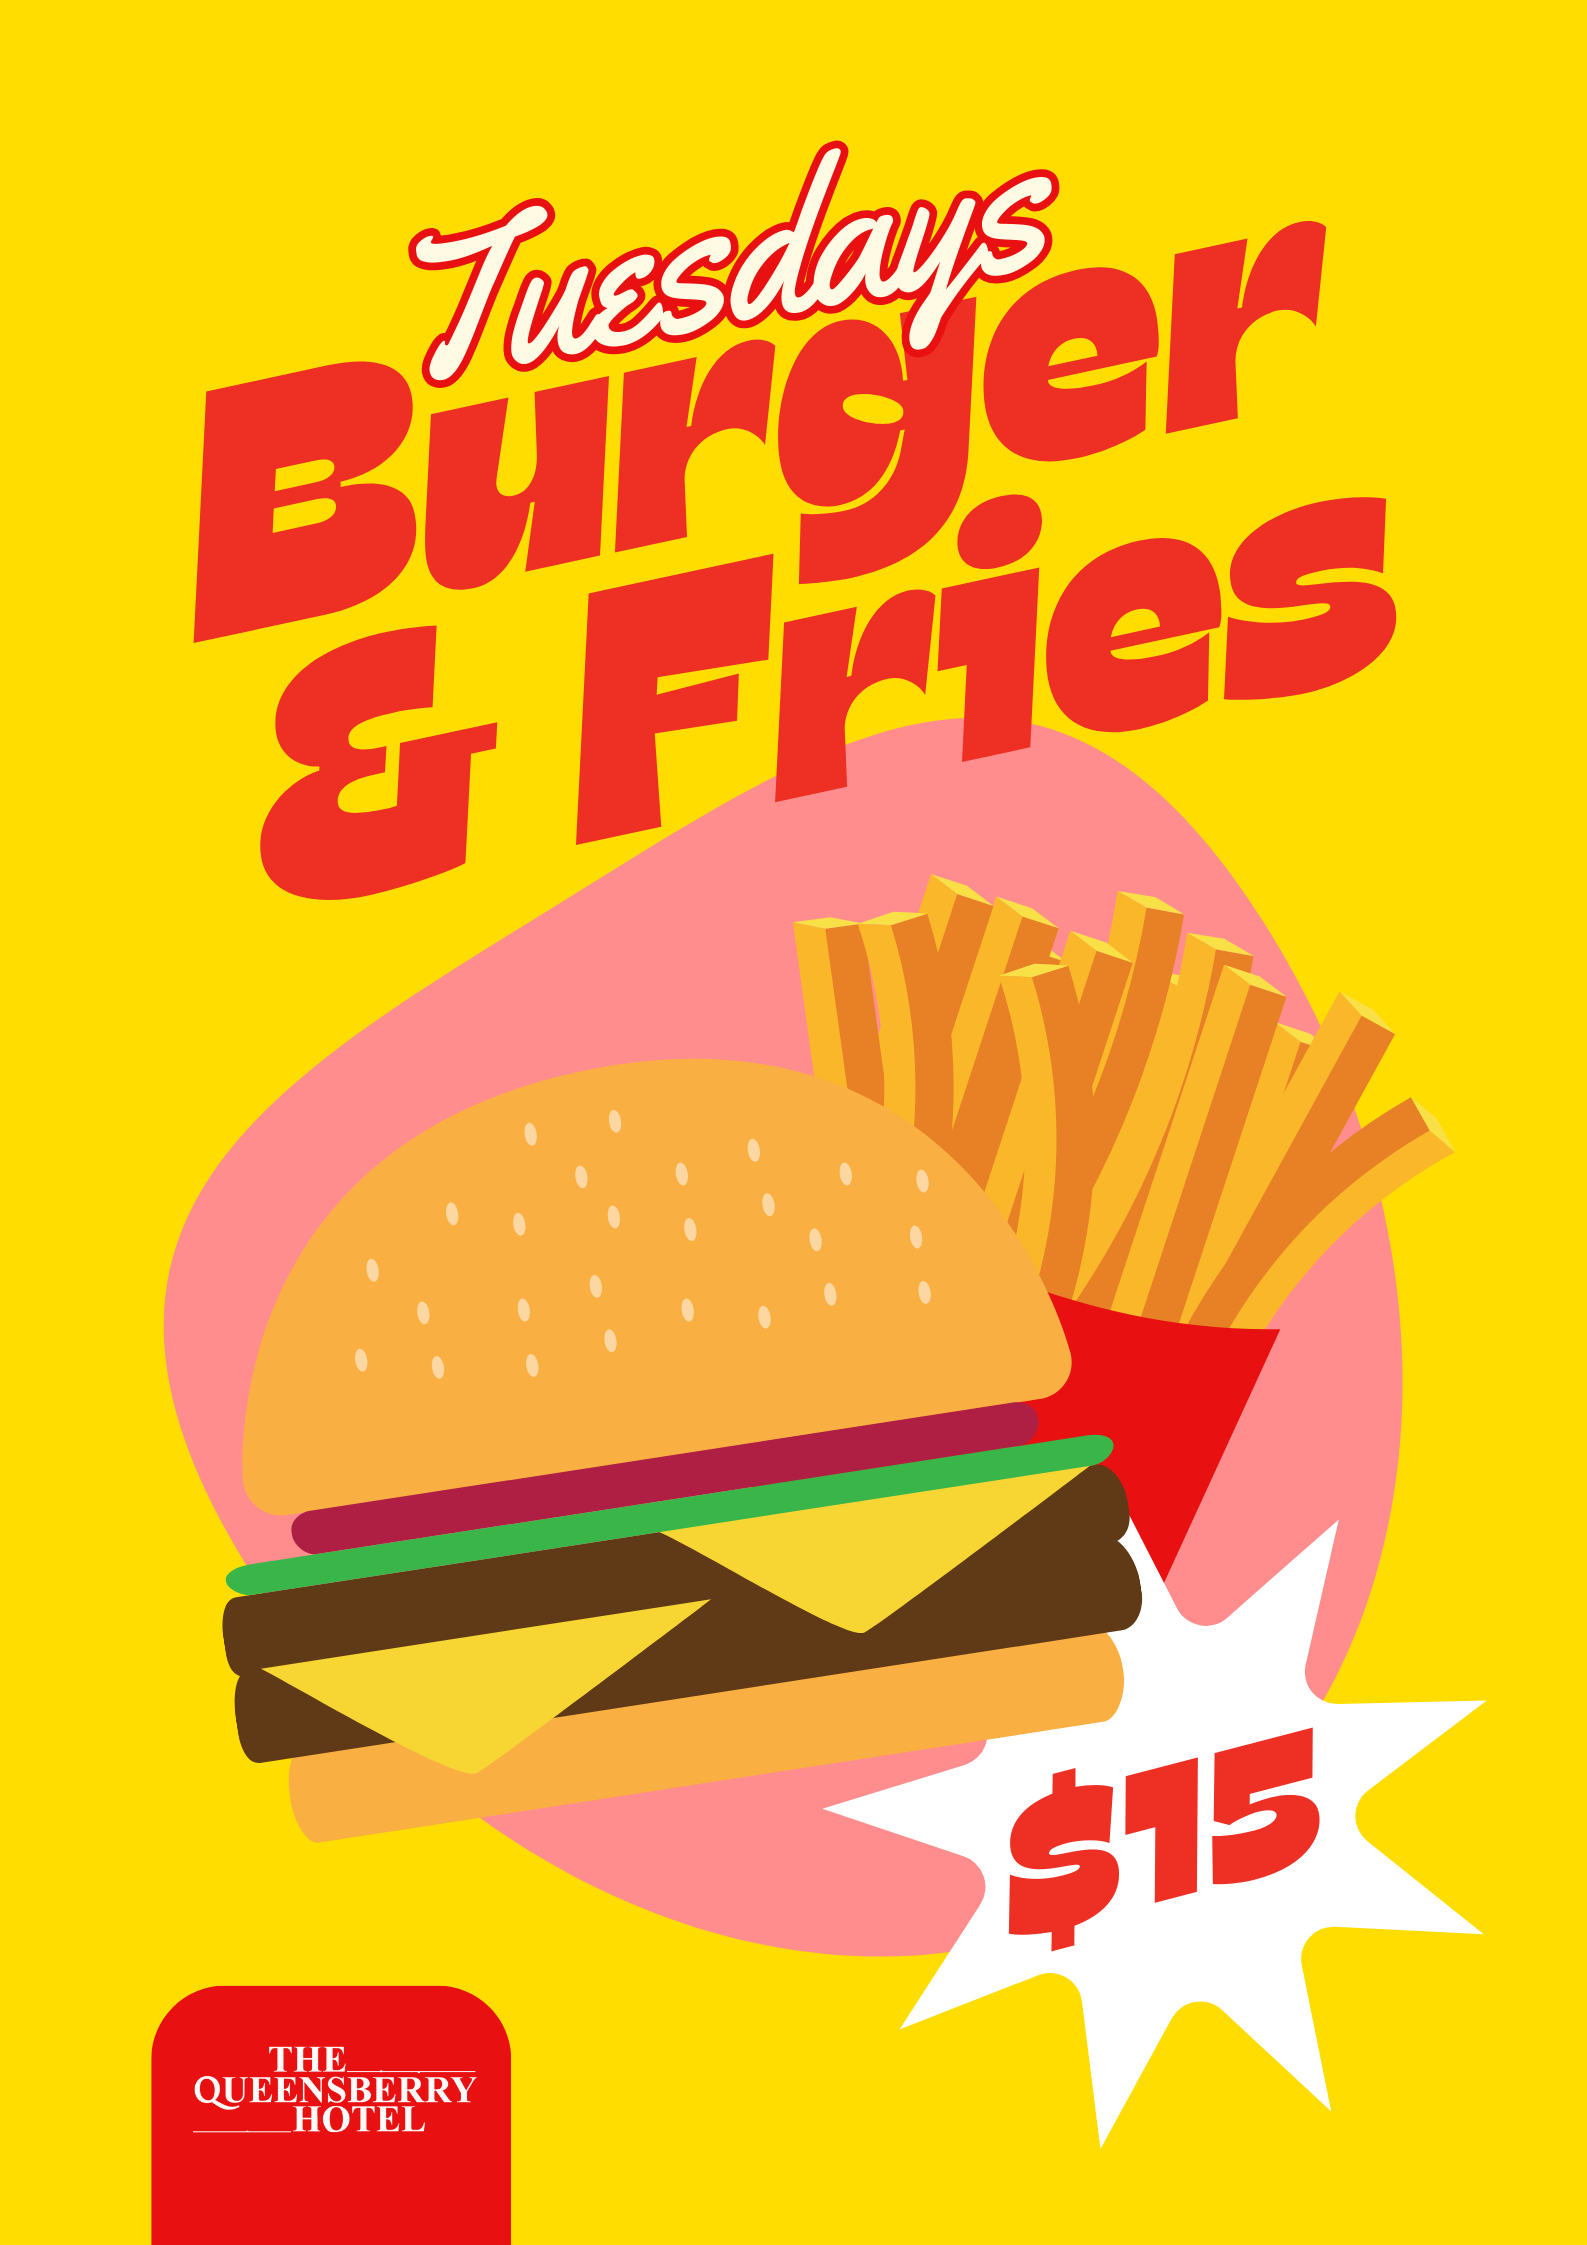 Tuesday Special | $15 Burger And Fries